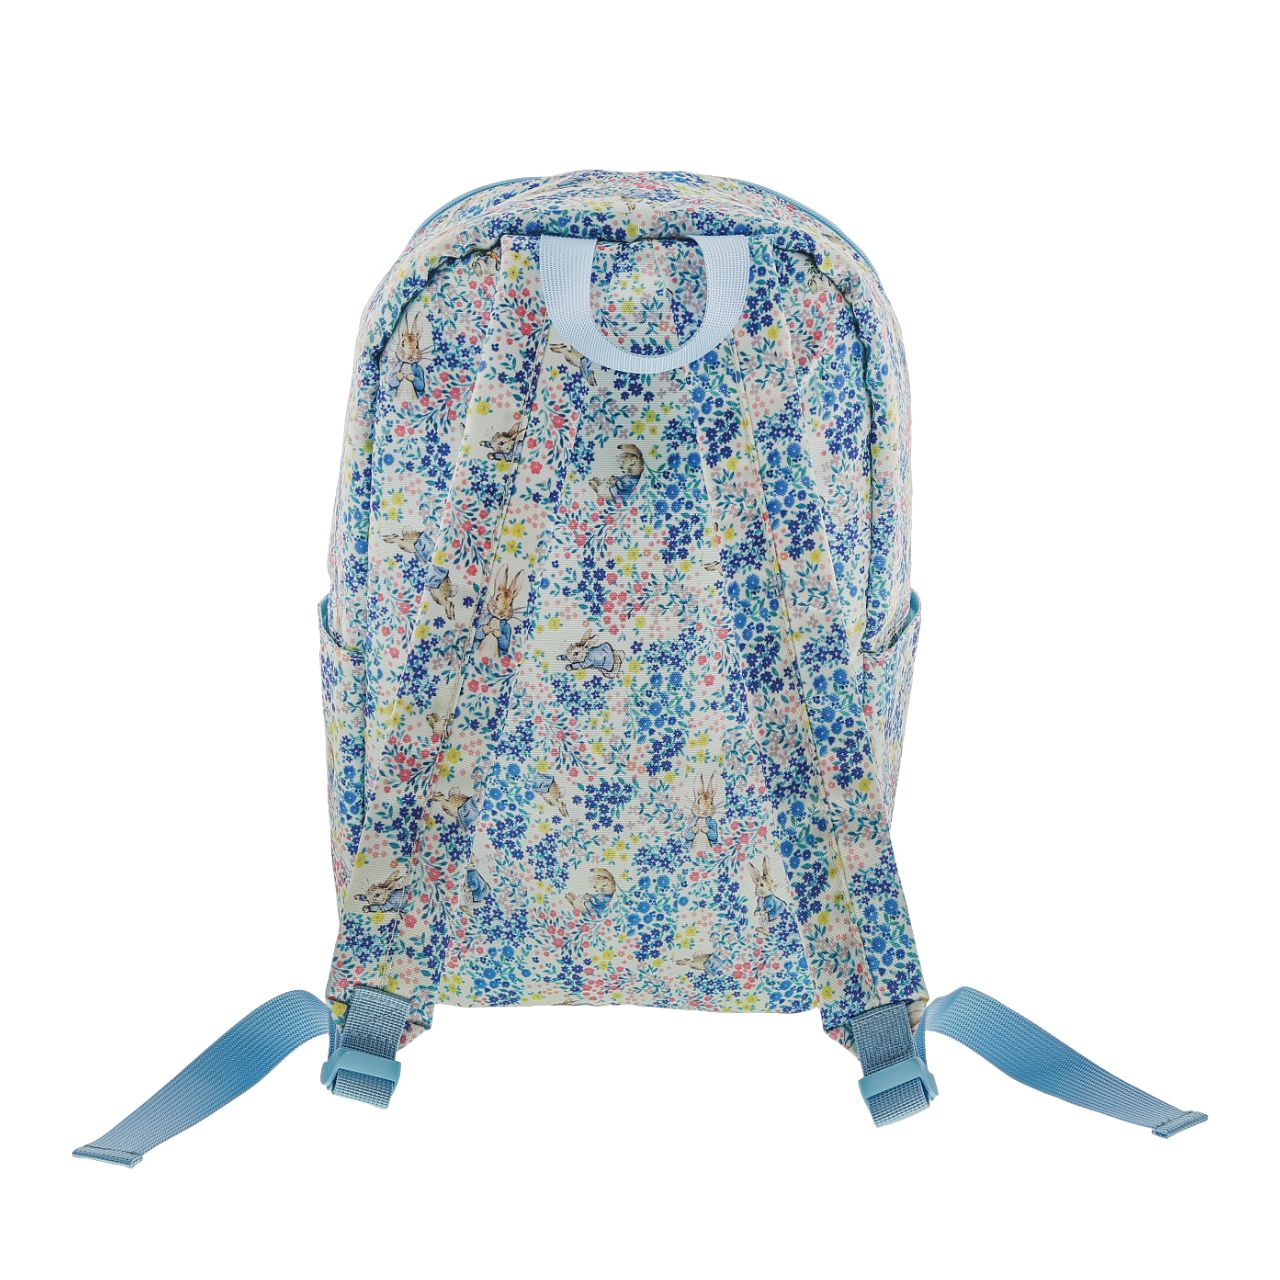 Beatrix Potter Peter Rabbit Garden Party Backpack  This classic adult backpack features a brand new design as part of our Peter Rabbit Garden Party Pop Up Collection. A large interior with an exterior zip pocket, side pockets and adjustable straps makes this the perfect accessory for those on the go. 